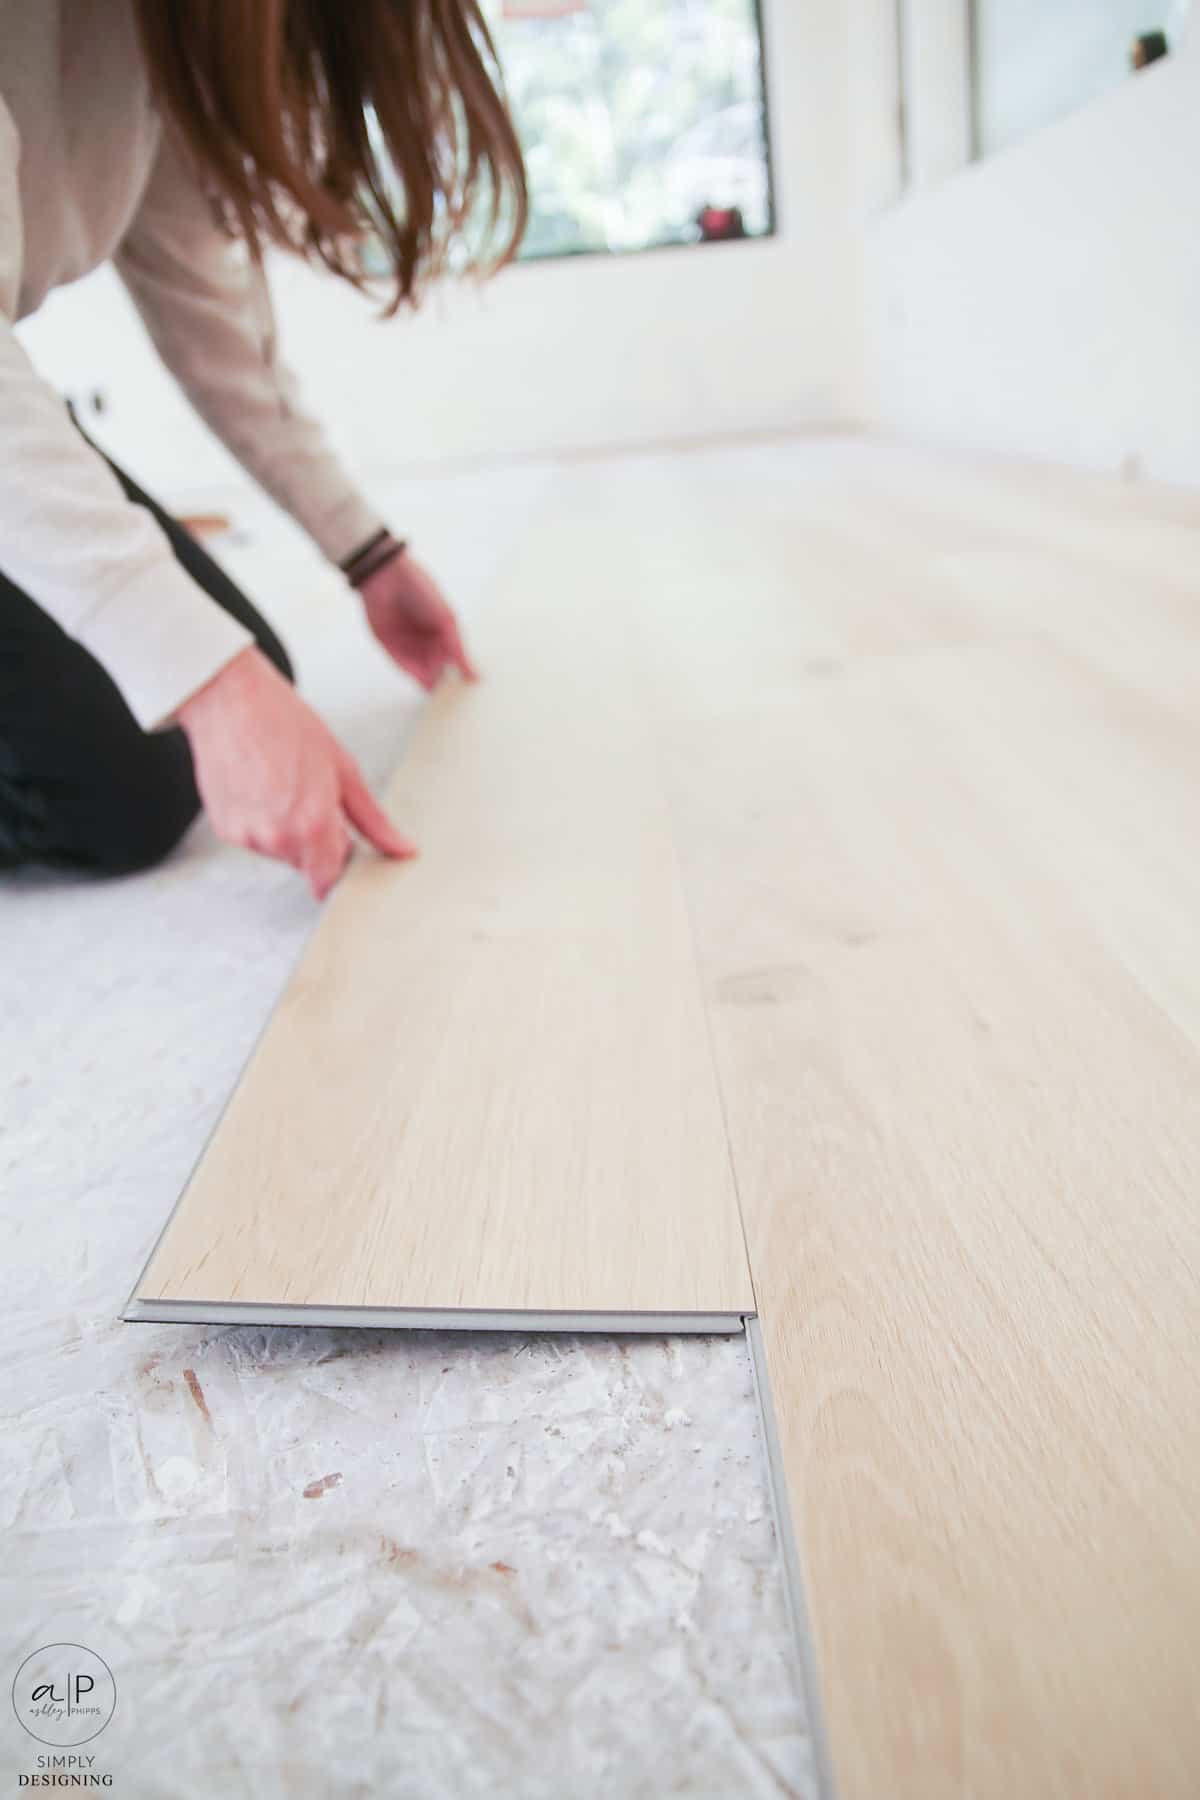 gently pushing down lvp flooring for installation